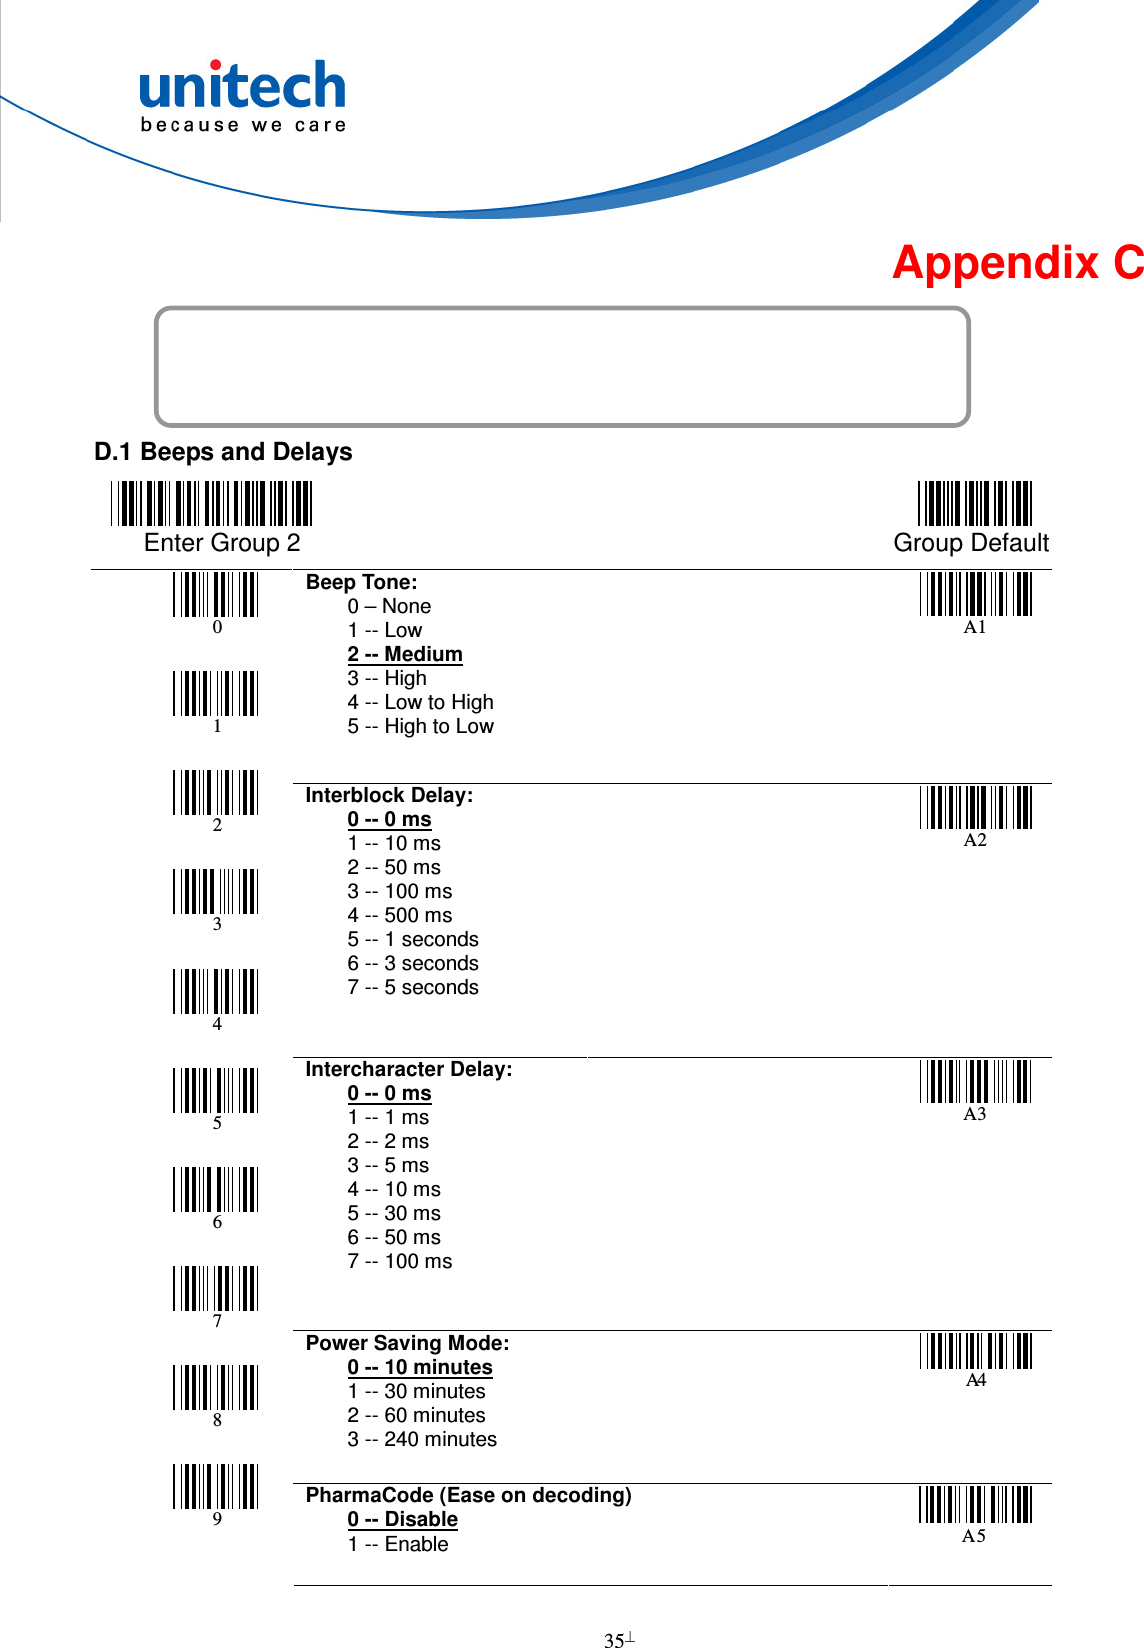  35  Appendix C Setup Menu  D.1 Beeps and Delays  Enter Group 2  Group Default Beep Tone:         0 – None         1 -- Low     2 -- Medium         3 -- High         4 -- Low to High         5 -- High to Low  A 1  Interblock Delay:     0 -- 0 ms         1 -- 10 ms         2 -- 50 ms         3 -- 100 ms         4 -- 500 ms         5 -- 1 seconds         6 -- 3 seconds         7 -- 5 seconds  A 2  Intercharacter Delay:     0 -- 0 ms         1 -- 1 ms         2 -- 2 ms         3 -- 5 ms         4 -- 10 ms         5 -- 30 ms         6 -- 50 ms         7 -- 100 ms  A 3  Power Saving Mode:     0 -- 10 minutes         1 -- 30 minutes         2 -- 60 minutes         3 -- 240 minutes  A 4        0       1       2       3       4       5       6       7       8       9 PharmaCode (Ease on decoding)     0 -- Disable         1 -- Enable A5  